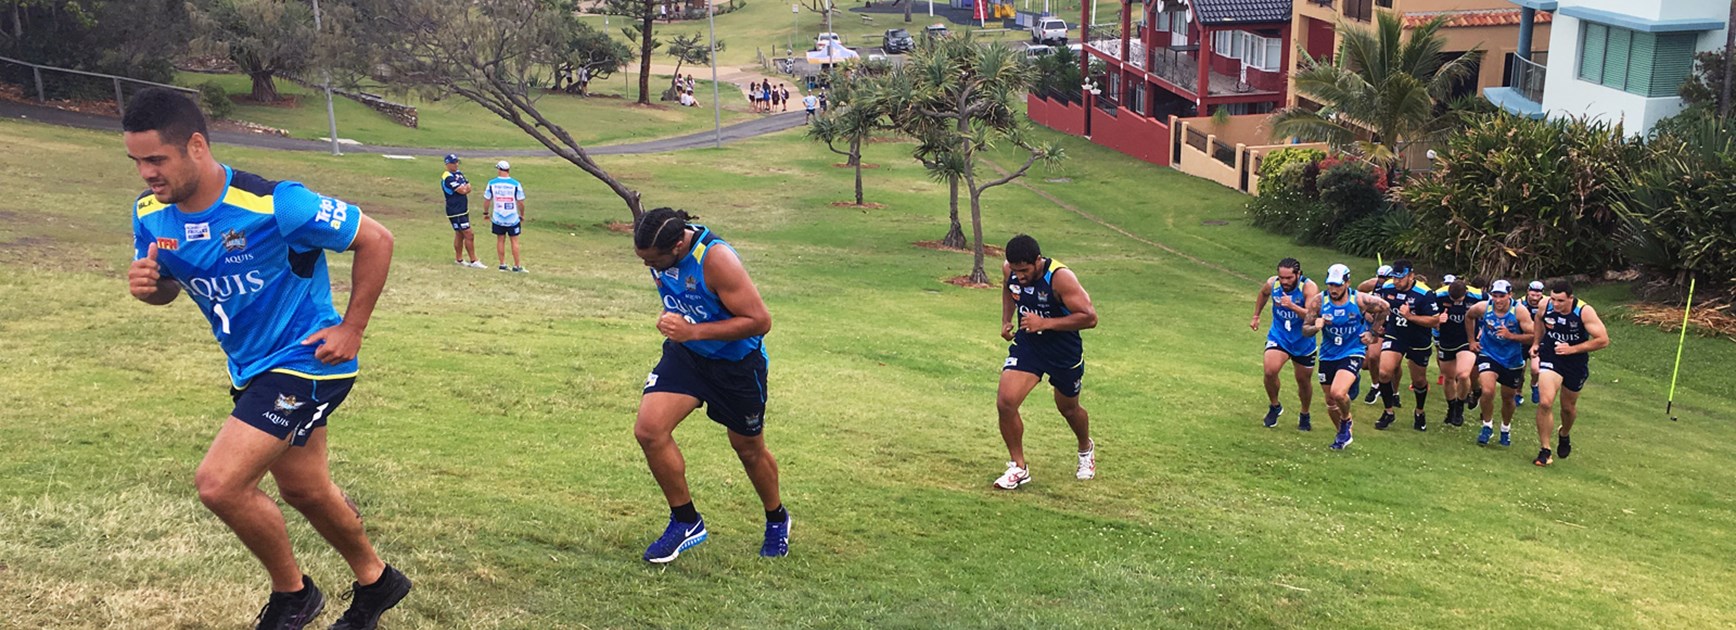 Jarryd Hayne leads the pack at Gold Coast Titans training.